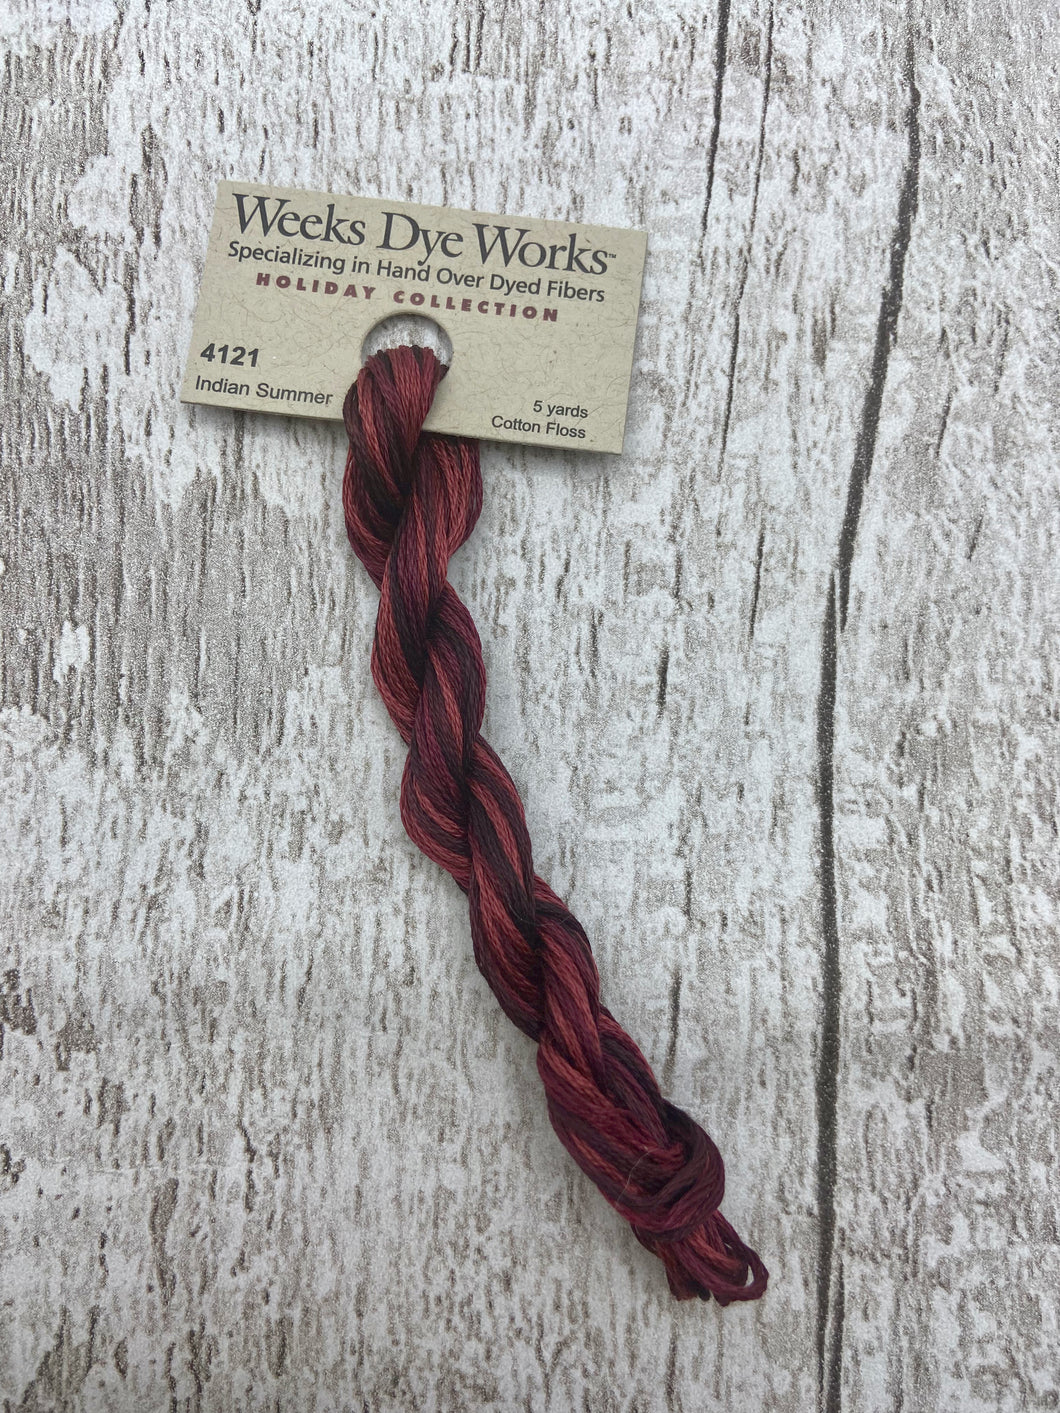 Indian Summer (#4121) Weeks Dye Works 6-strand cotton floss